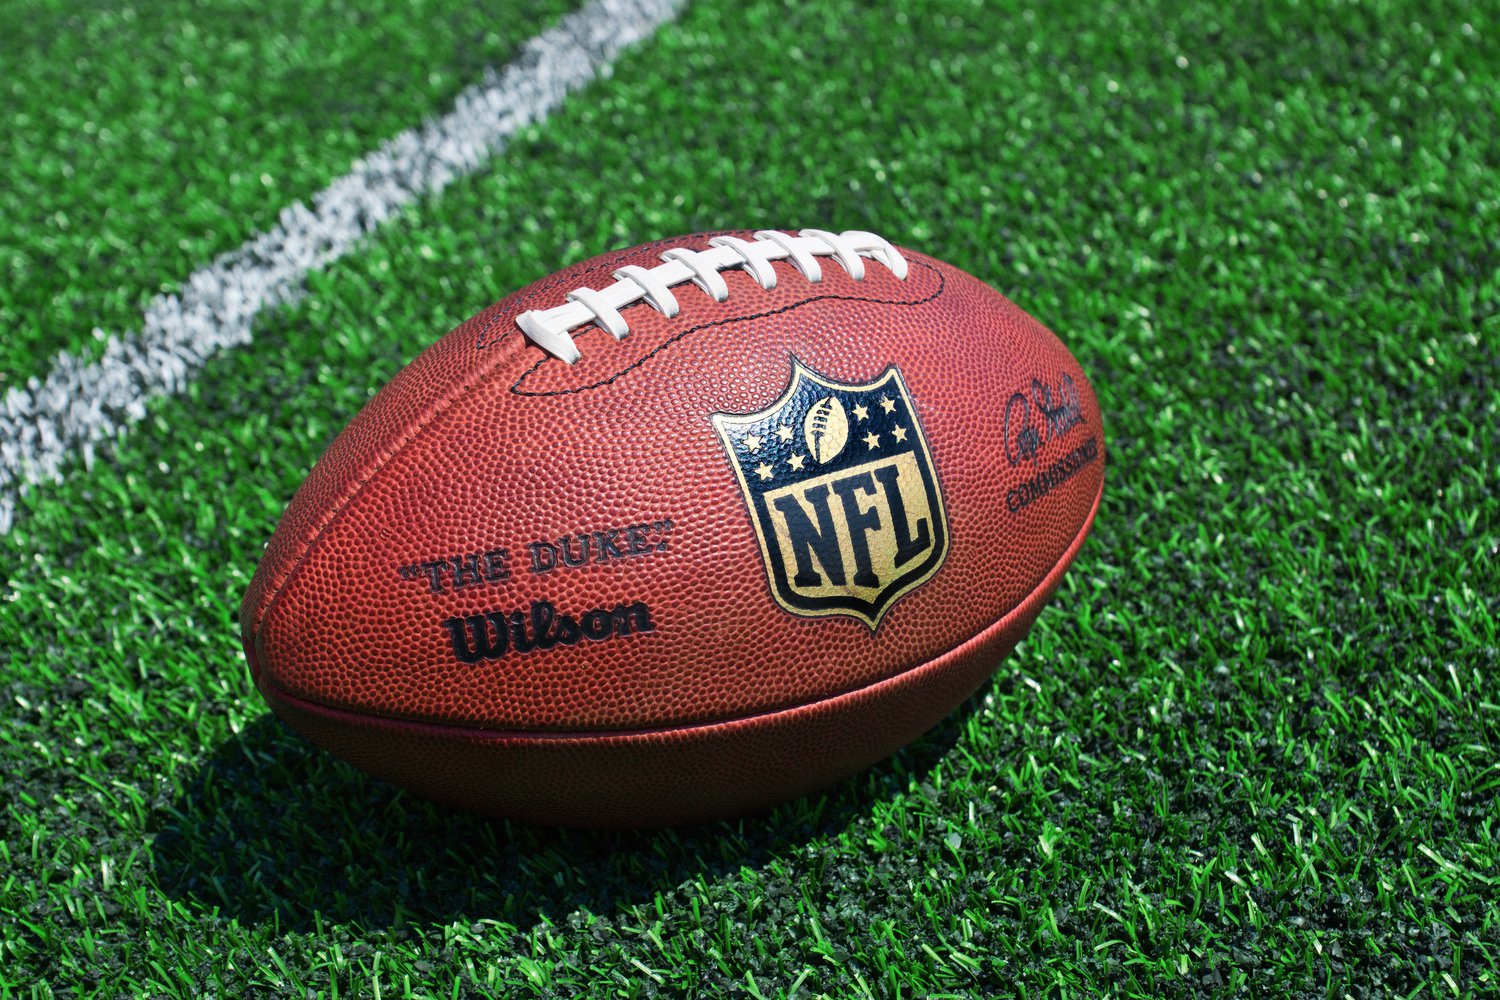 NFL Players Union Strikes Deal To Help Athletes Earn Crypto